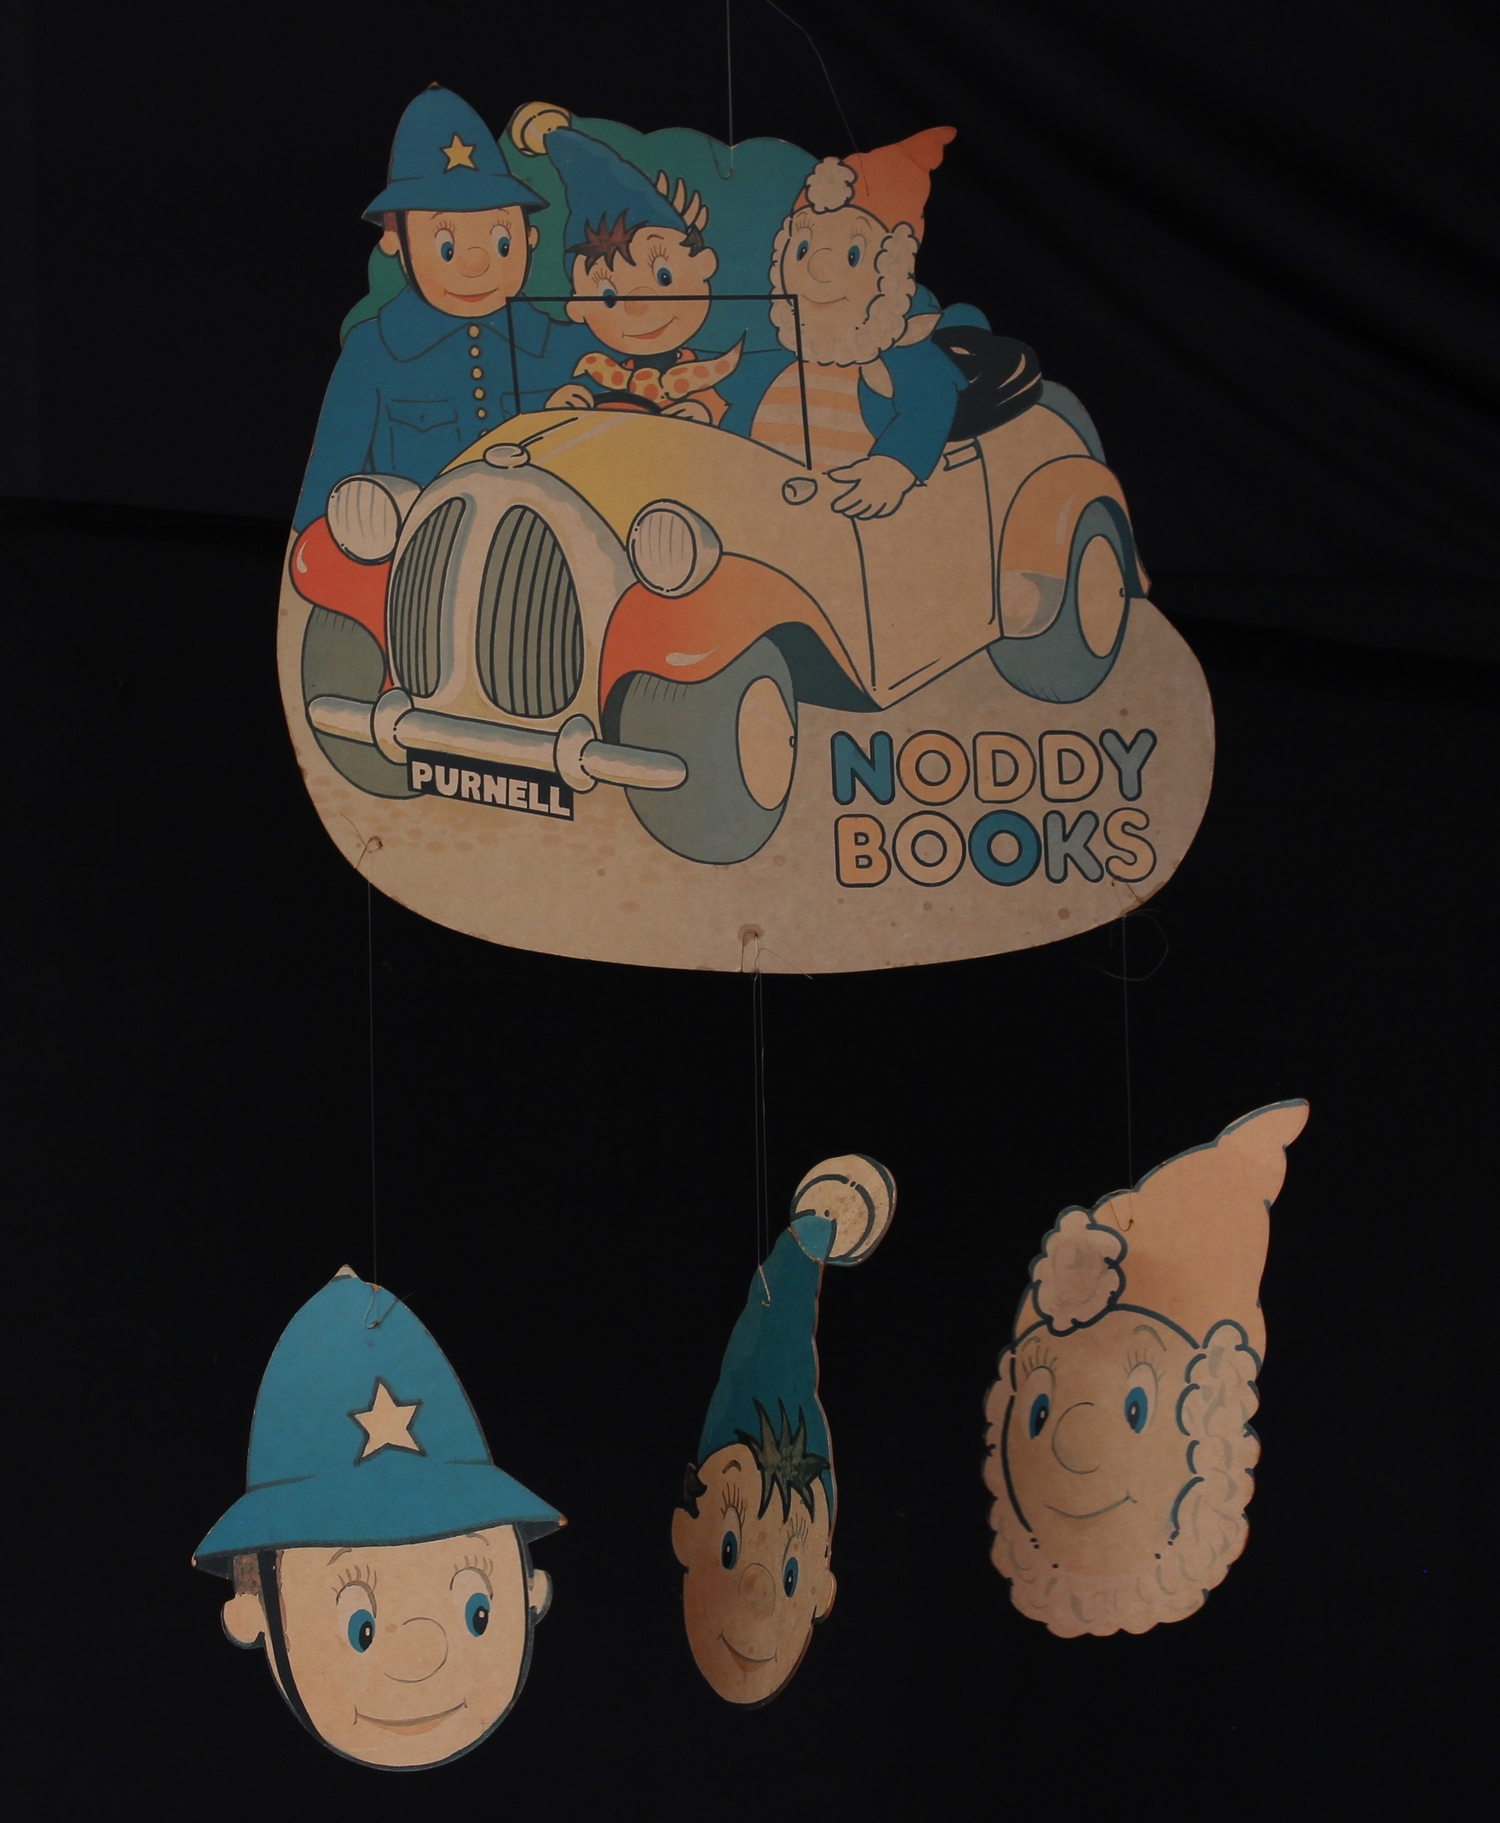 Advertising - a 1960's Purnell/Noddy Books novelty cardboard double sided shop display hanging